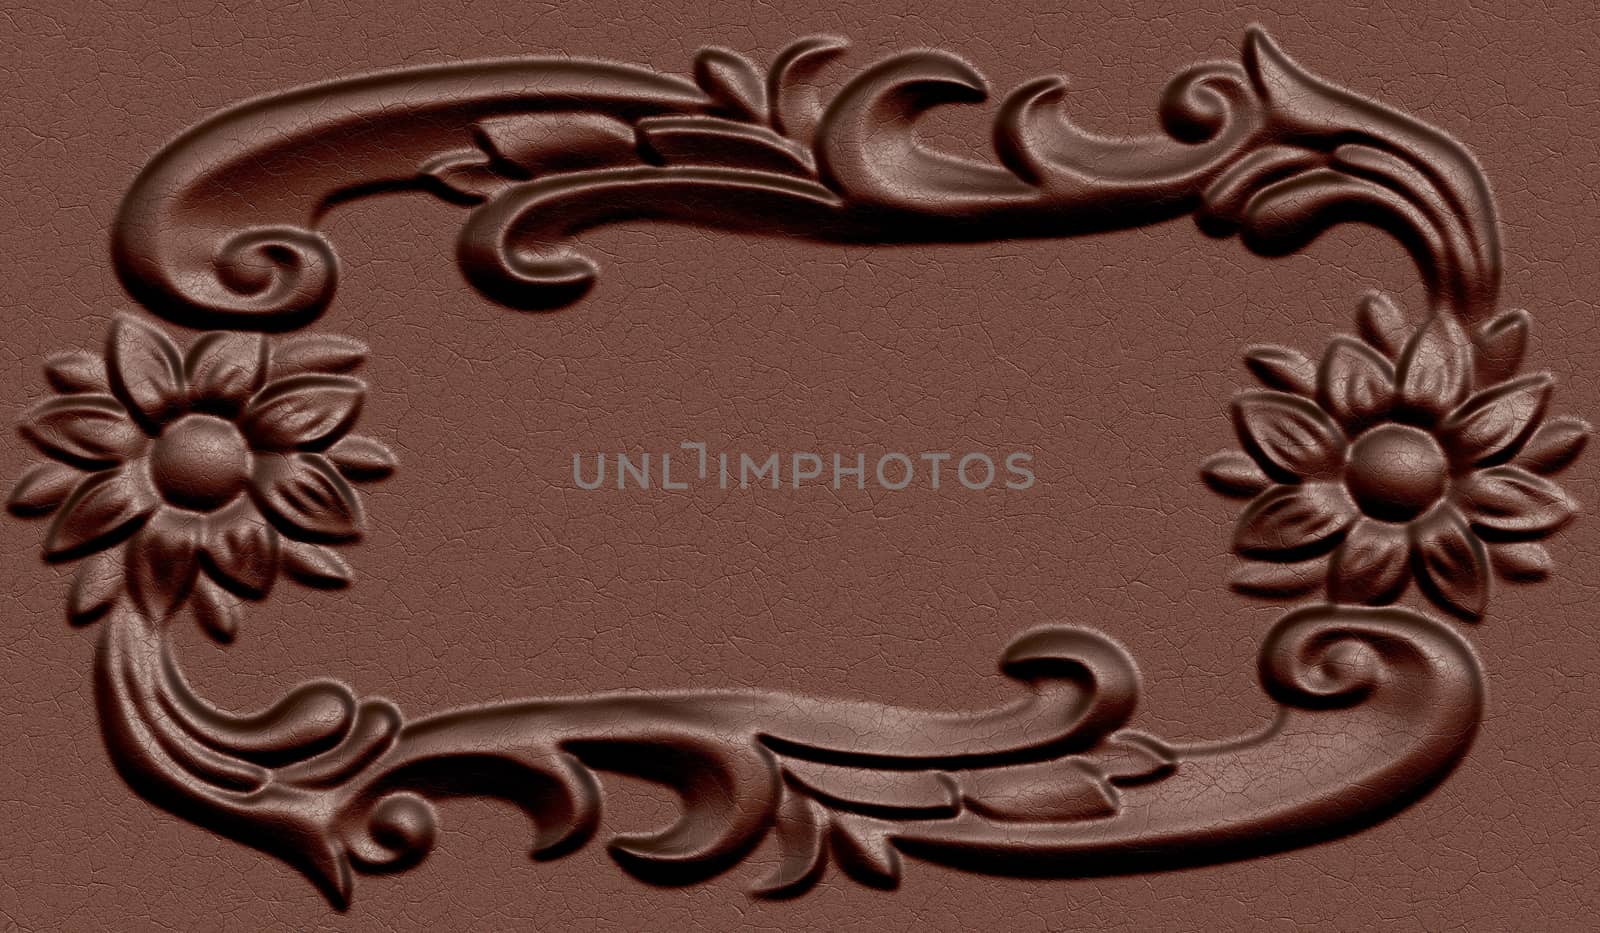 3d swirl floral luxury background decorative ornament leather frame.